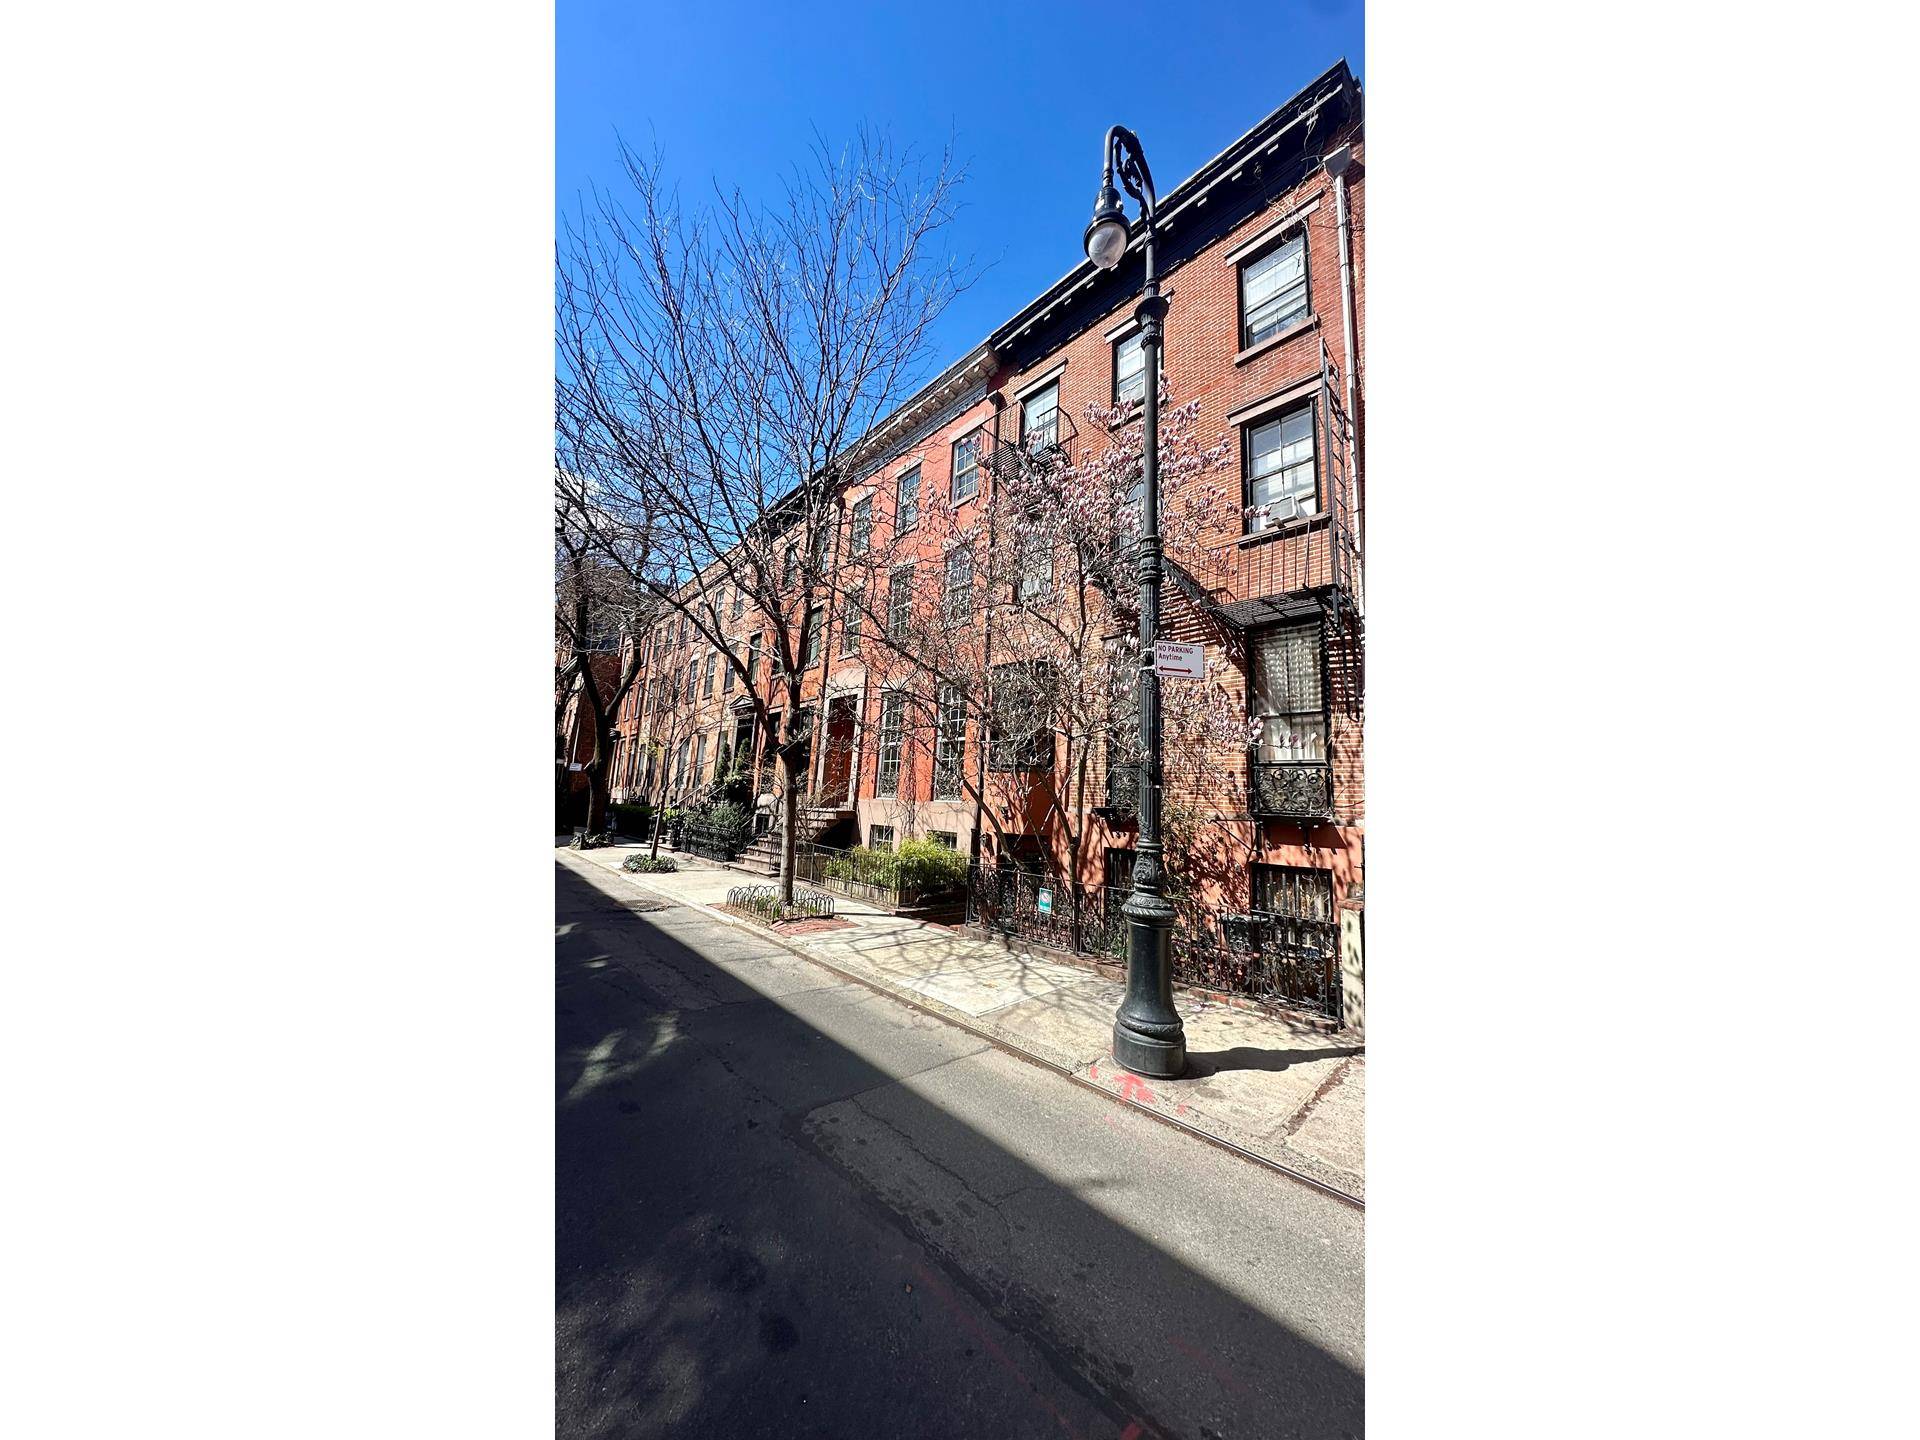 Located in a beautiful brownstone on one of the most picturesque blocks in the West Village this charming one bedroom apartment featuring a large private terrace will make an ideal ...